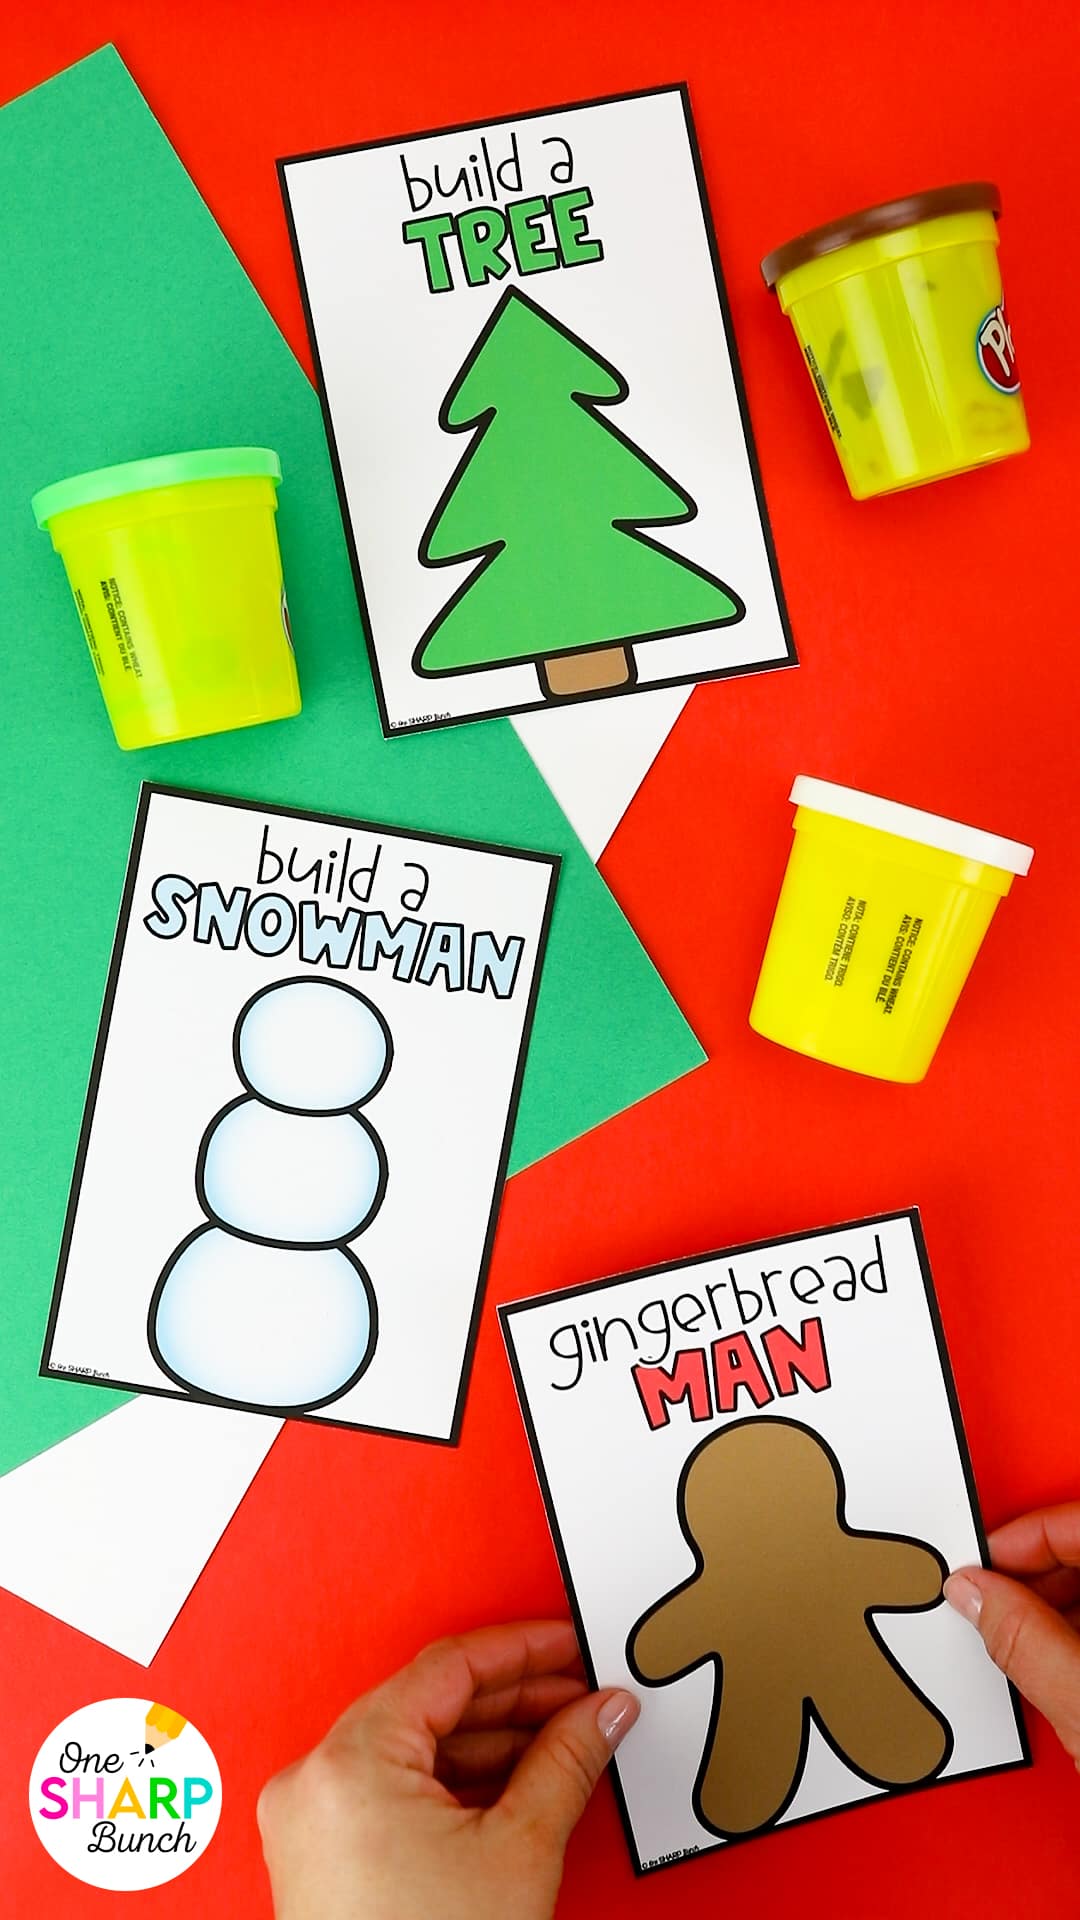 Build fine motor skills and boost imaginative play with these individual Christmas play dough kits for kids! This holiday party activity serves as both a Christmas craft and a Christmas sensory activity. Students will create their own winter designs using the Christmas play dough mats. These play dough kits also make a great Christmas student gift. Your preschool, kindergarten and first grade students will love this sensory play activity during your Christmas party stations!